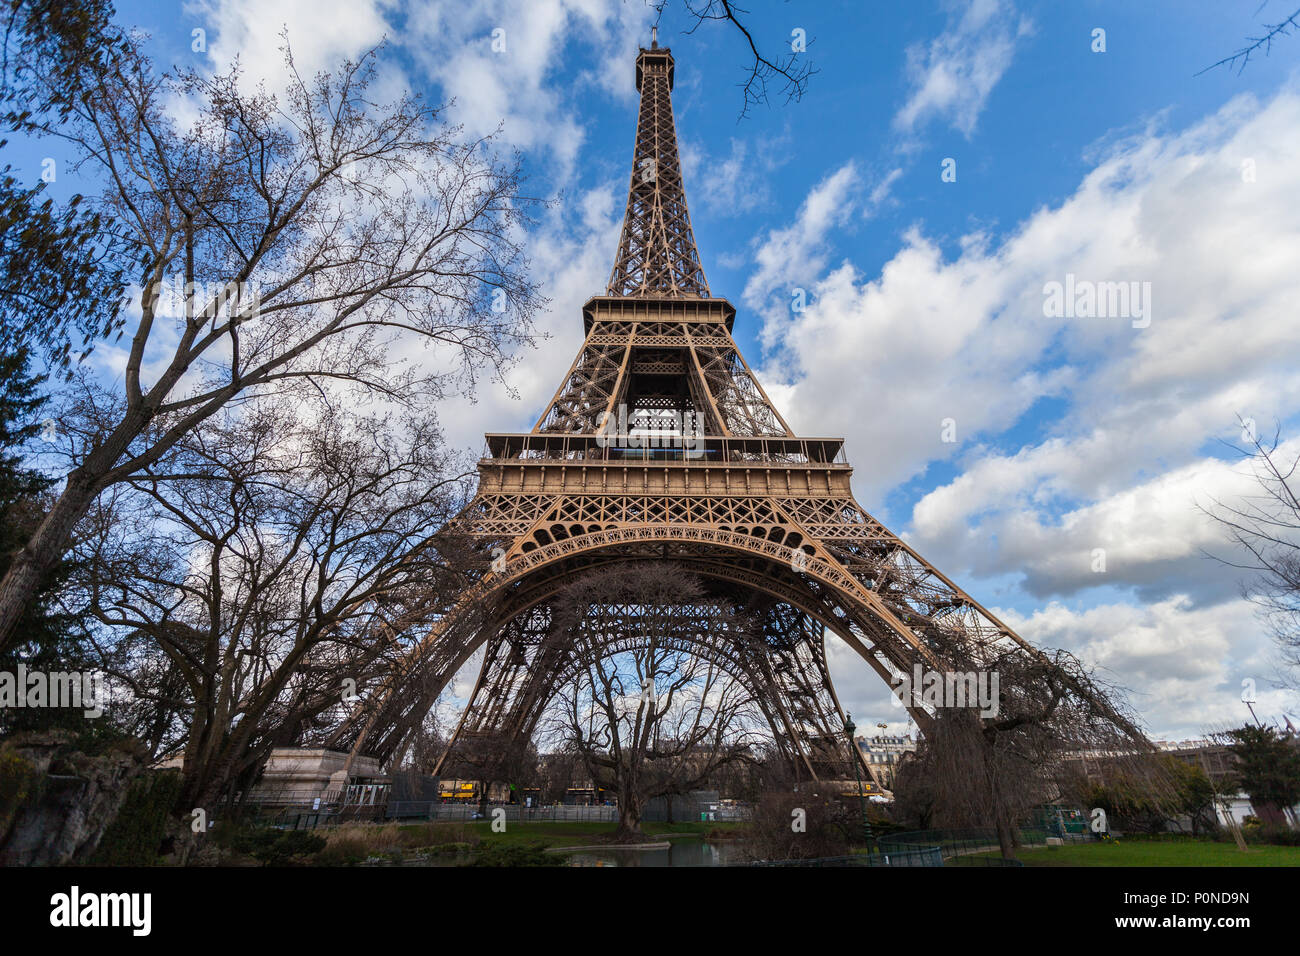 Wide angle view of iconic Eiffel tower with dramatic cloudy blue sky in the background. Stock Photo